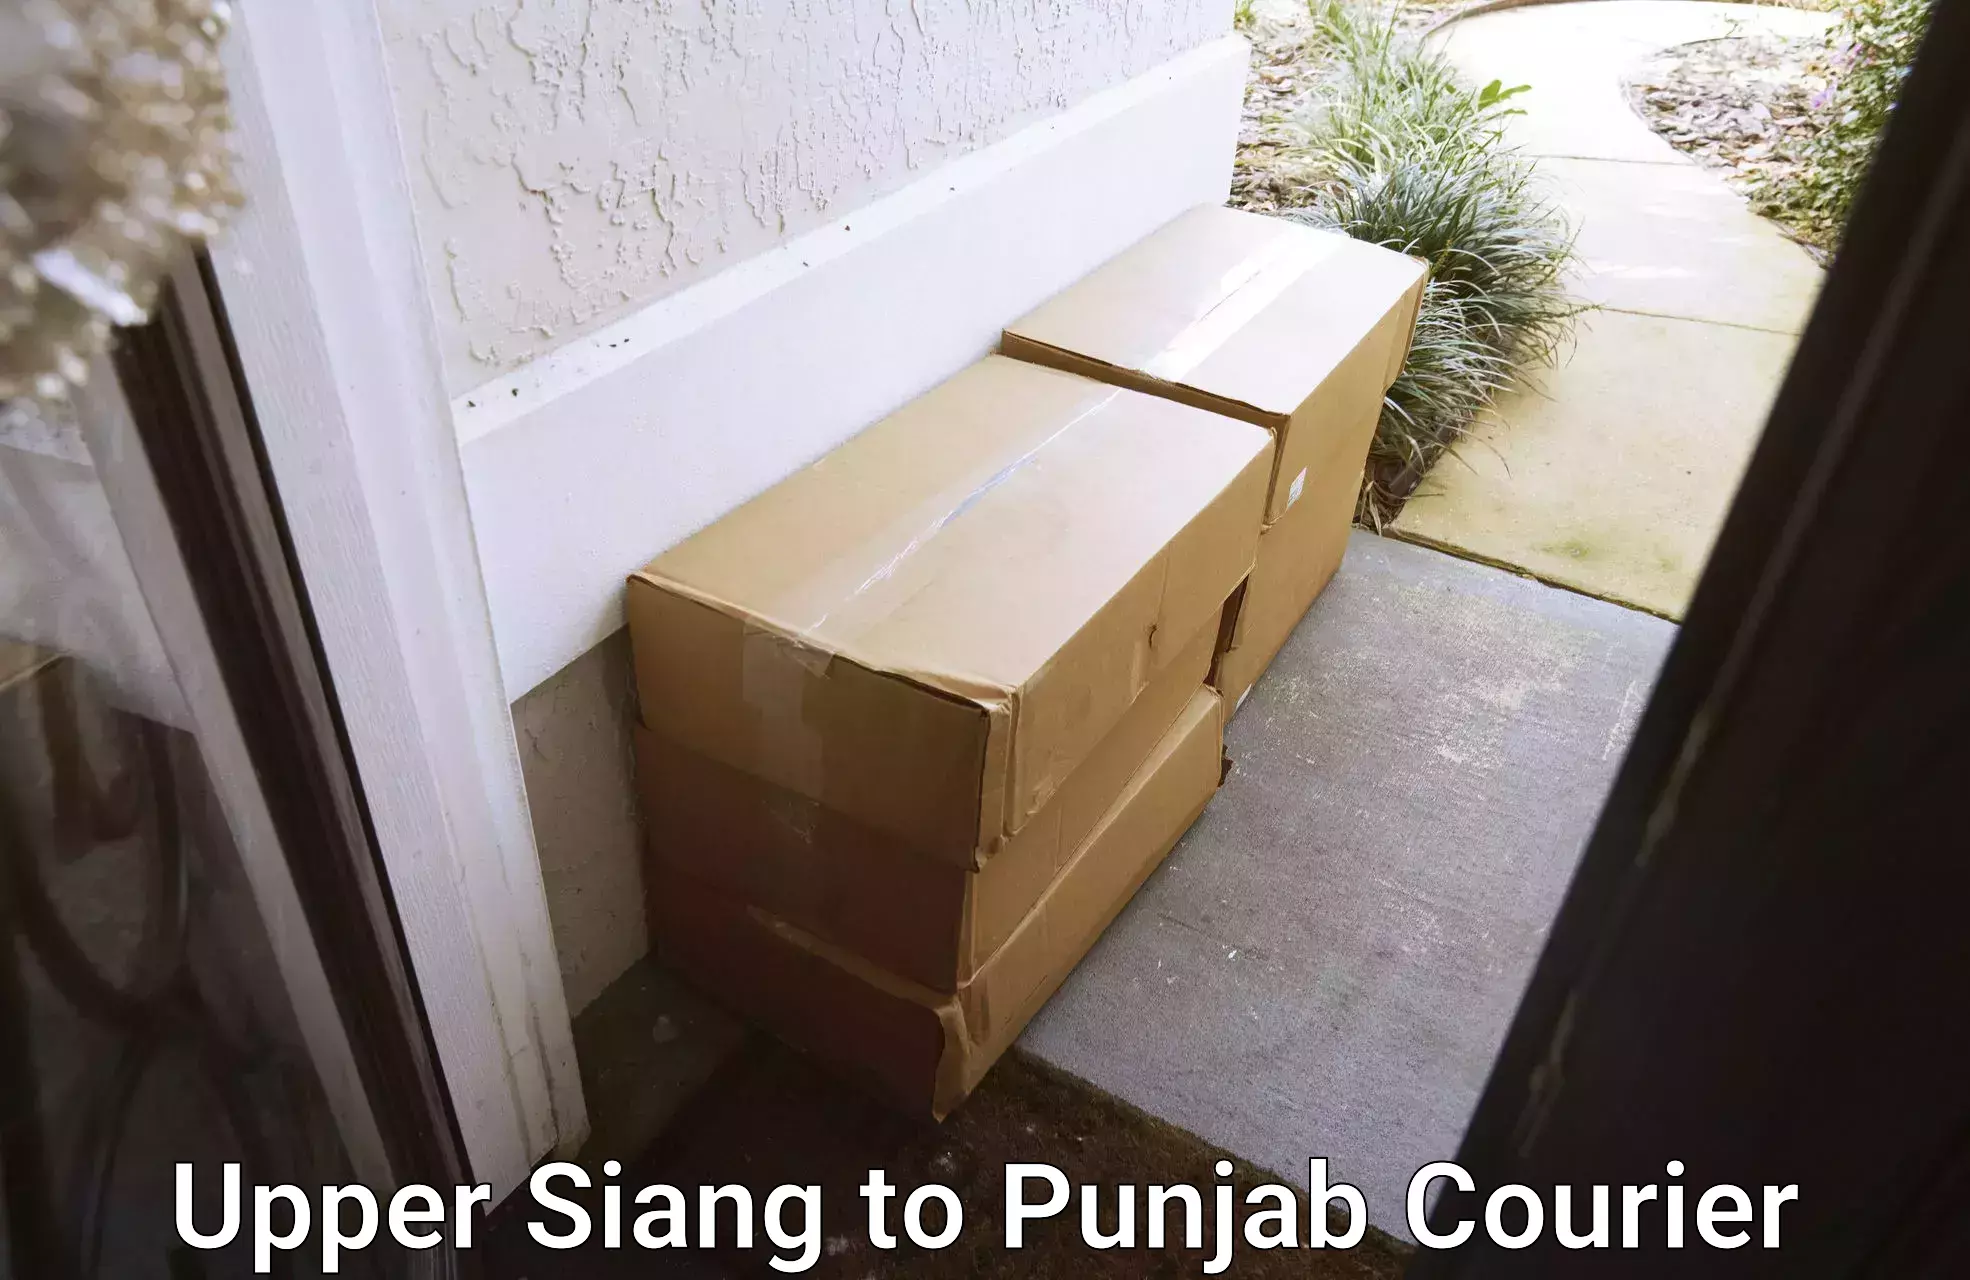 24-hour courier service Upper Siang to Nakodar